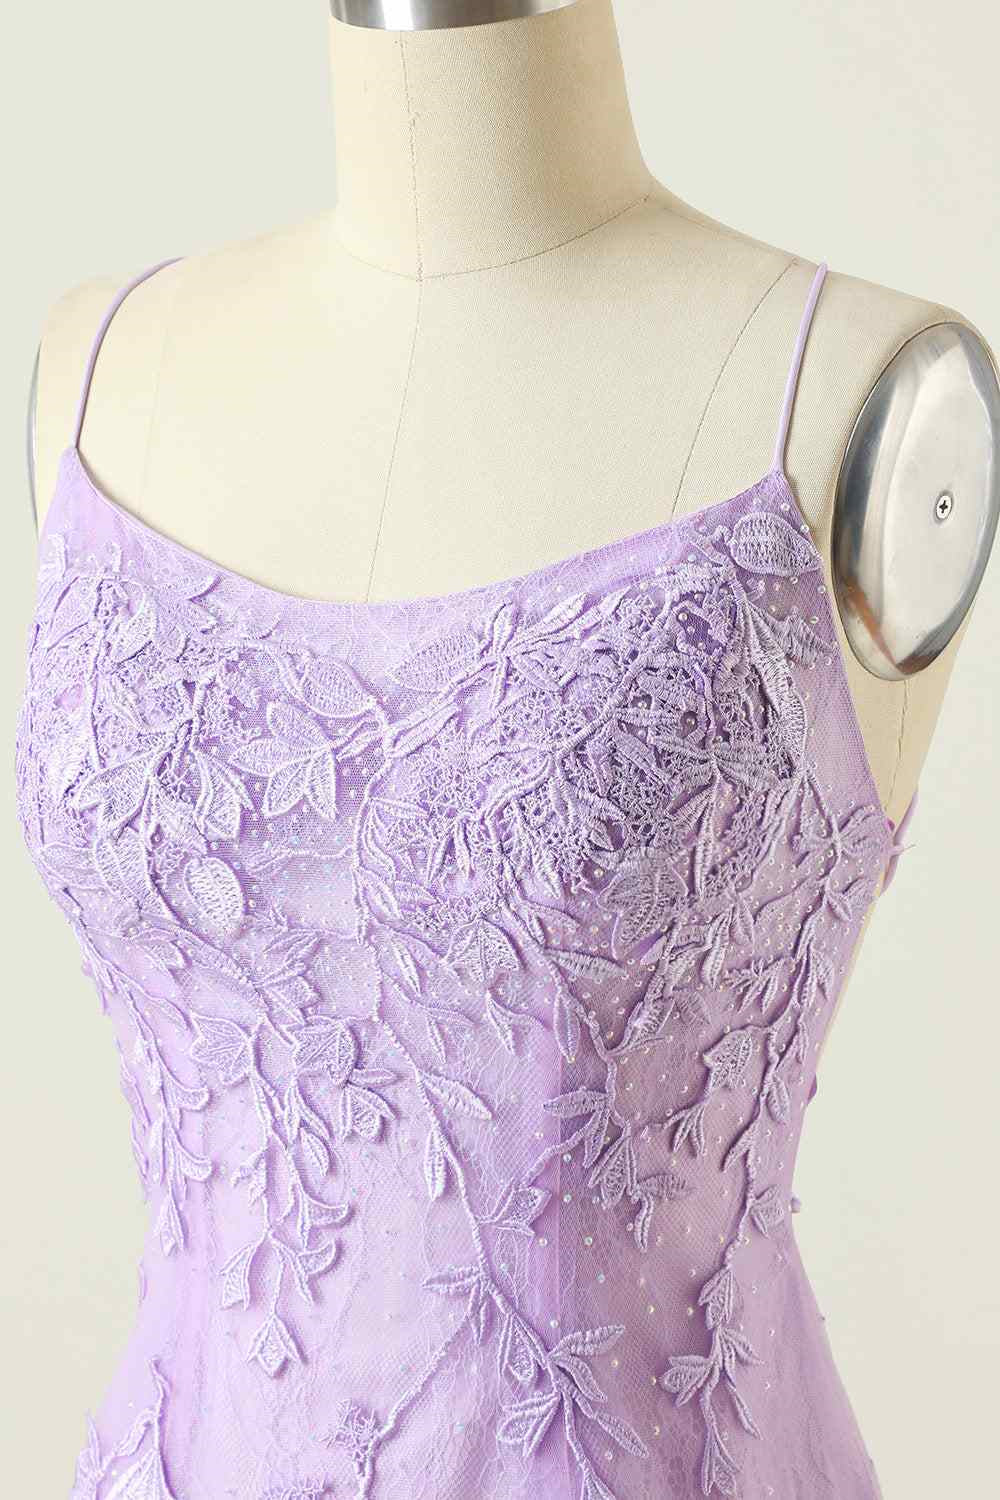 Lilac Sheath Scoop Neck Lace-up Back Applique Mini Homecoming Dress